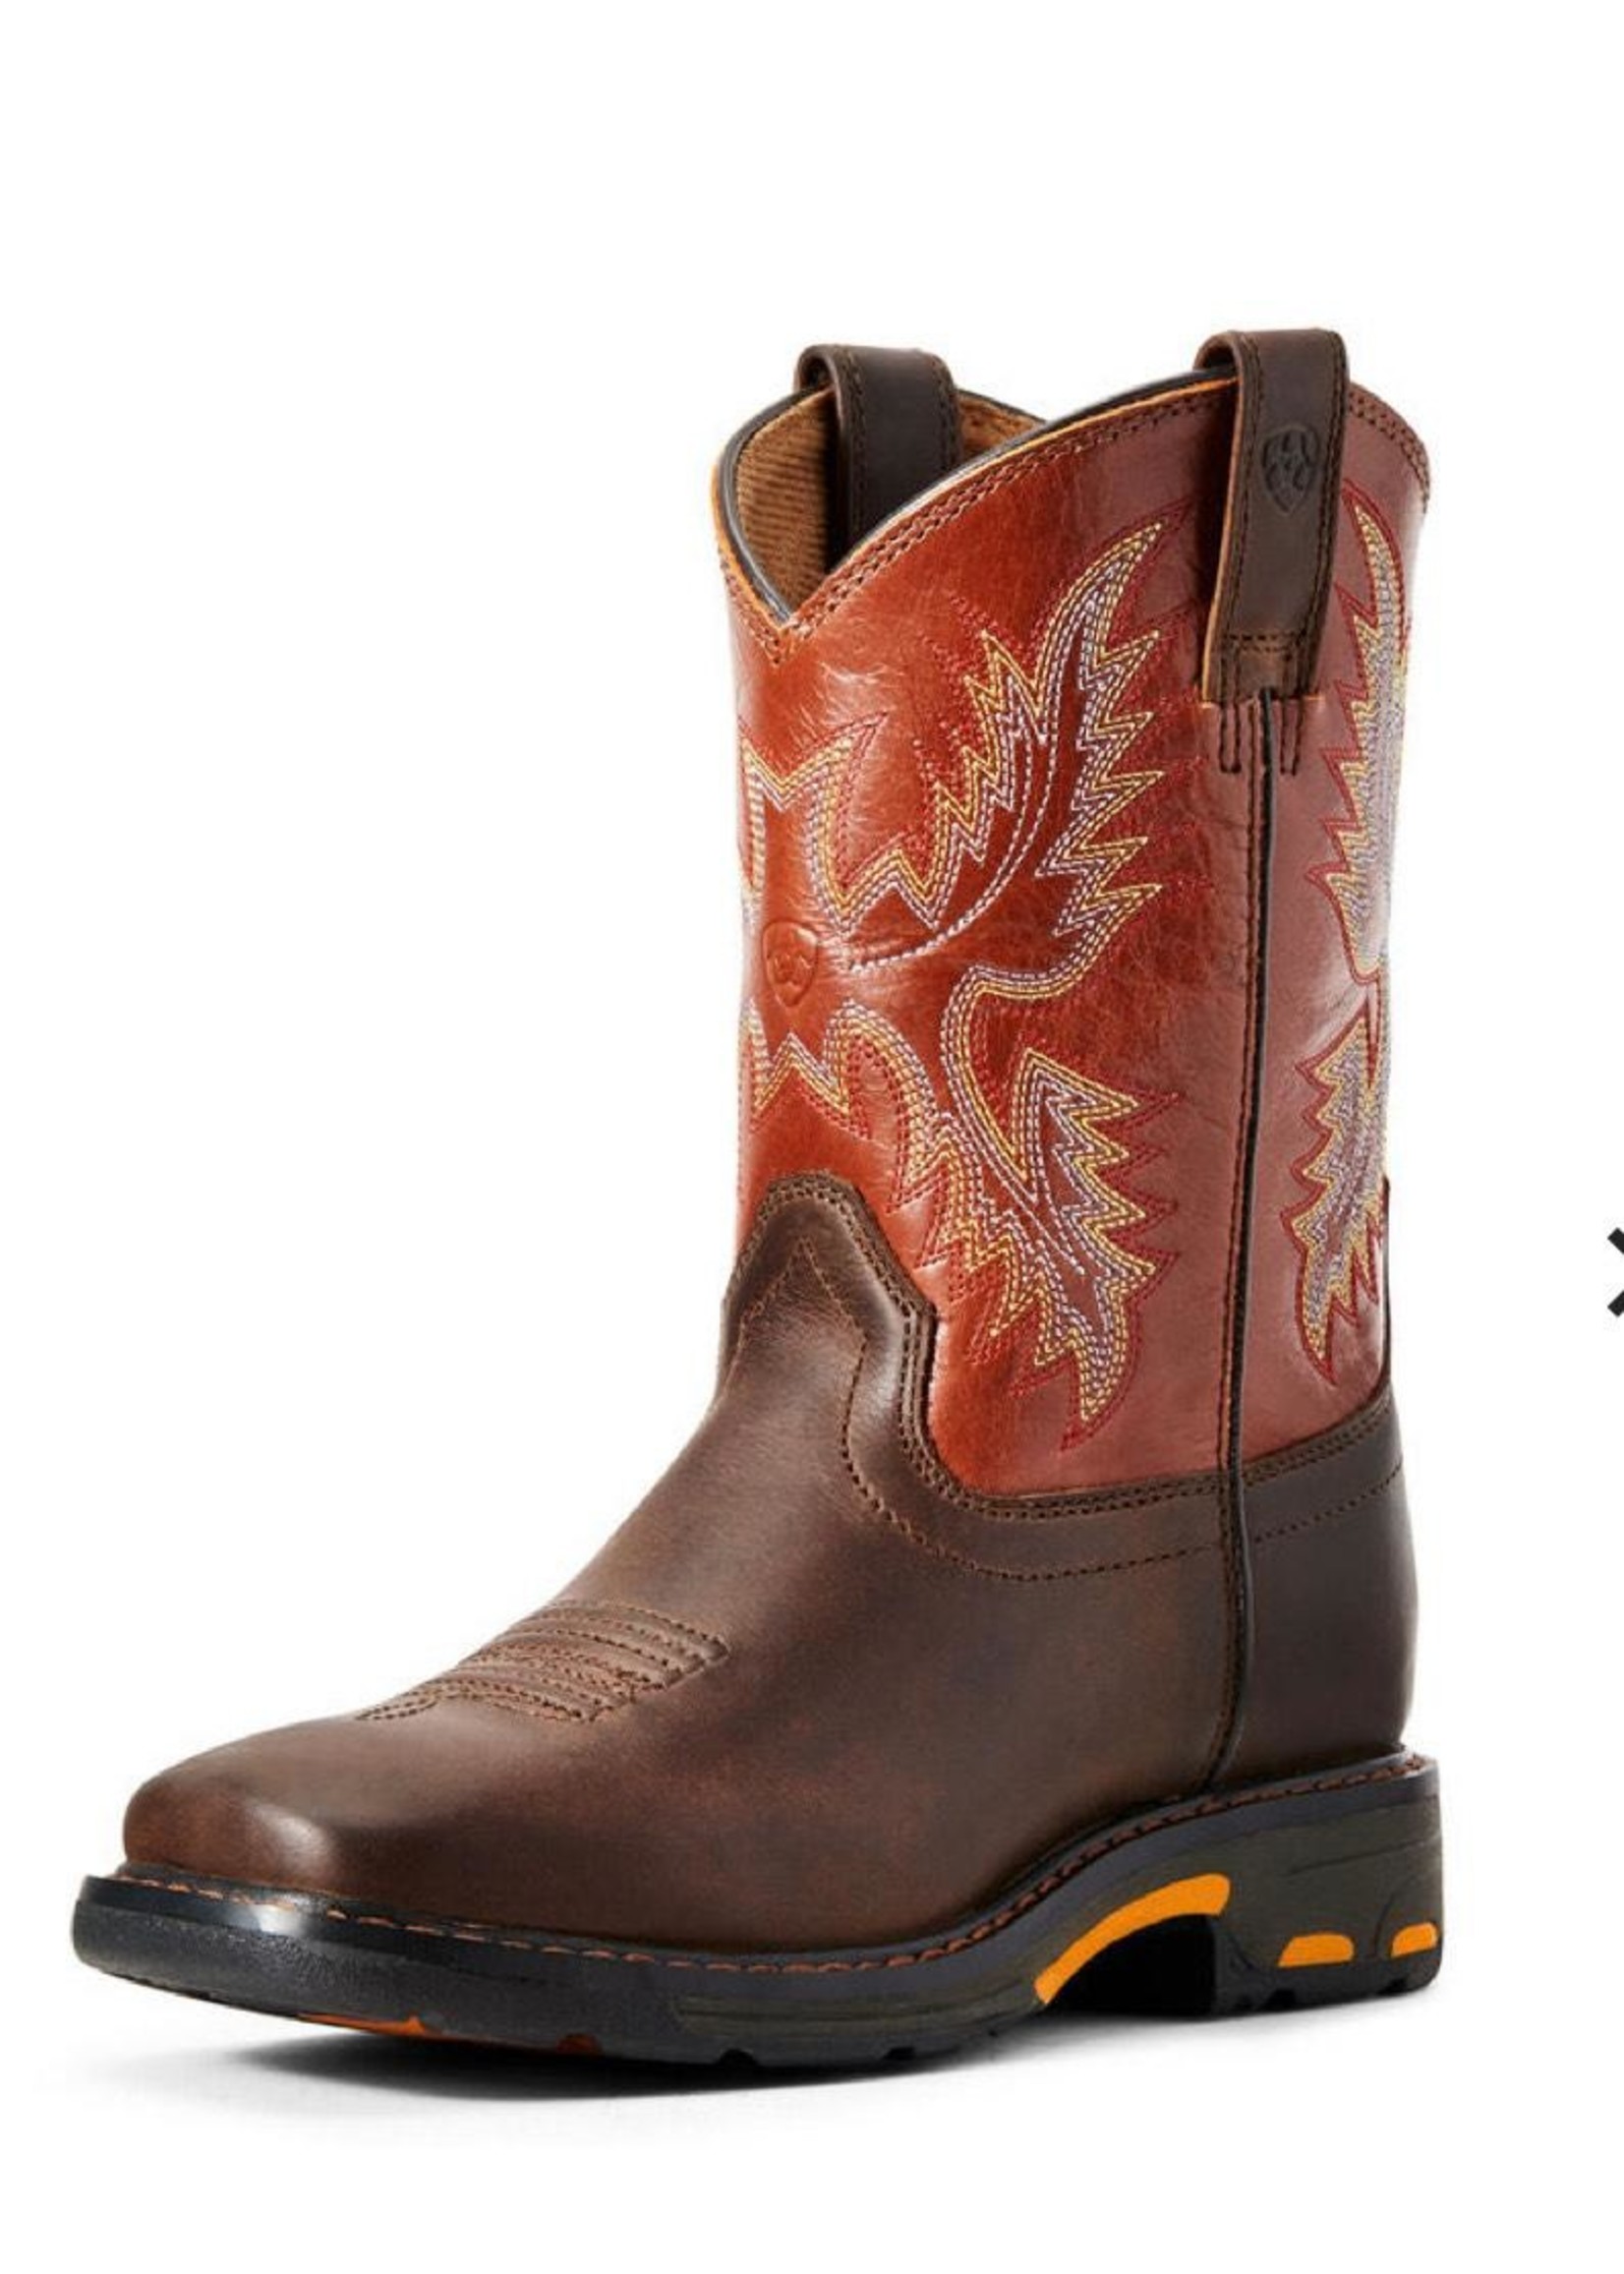 Ariat WorkHog Wide Square Toe Youth Boot